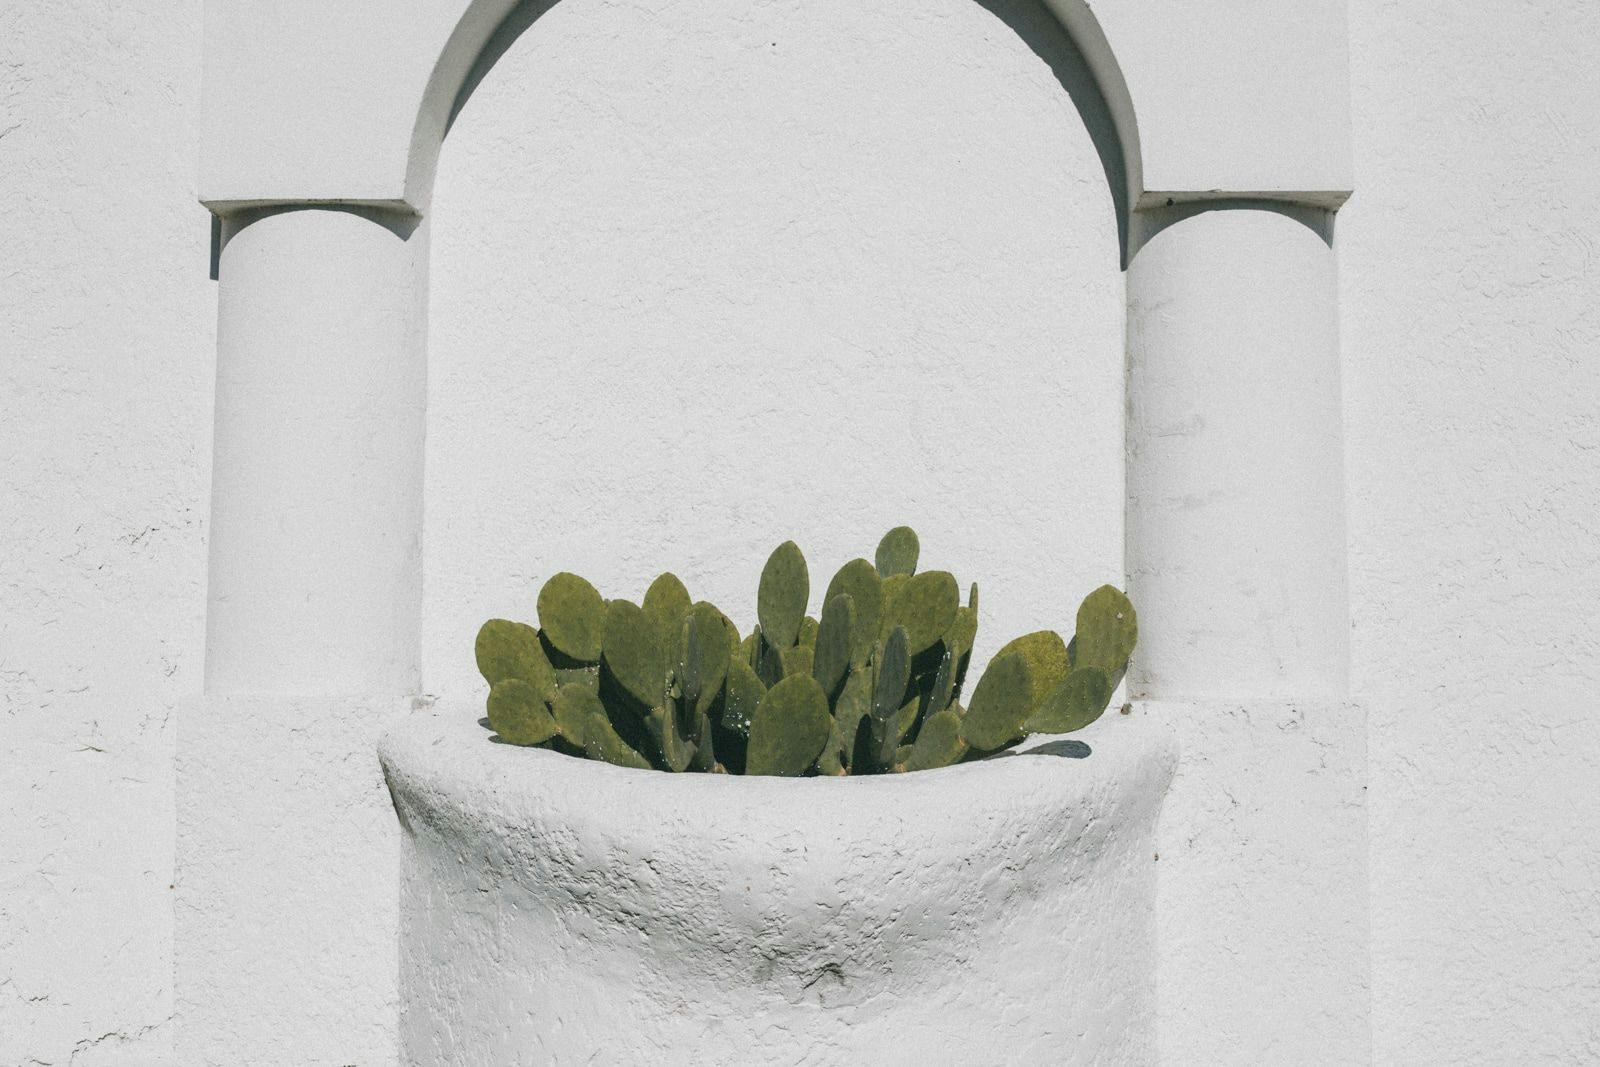 Cactus planted in a pot on a white wall